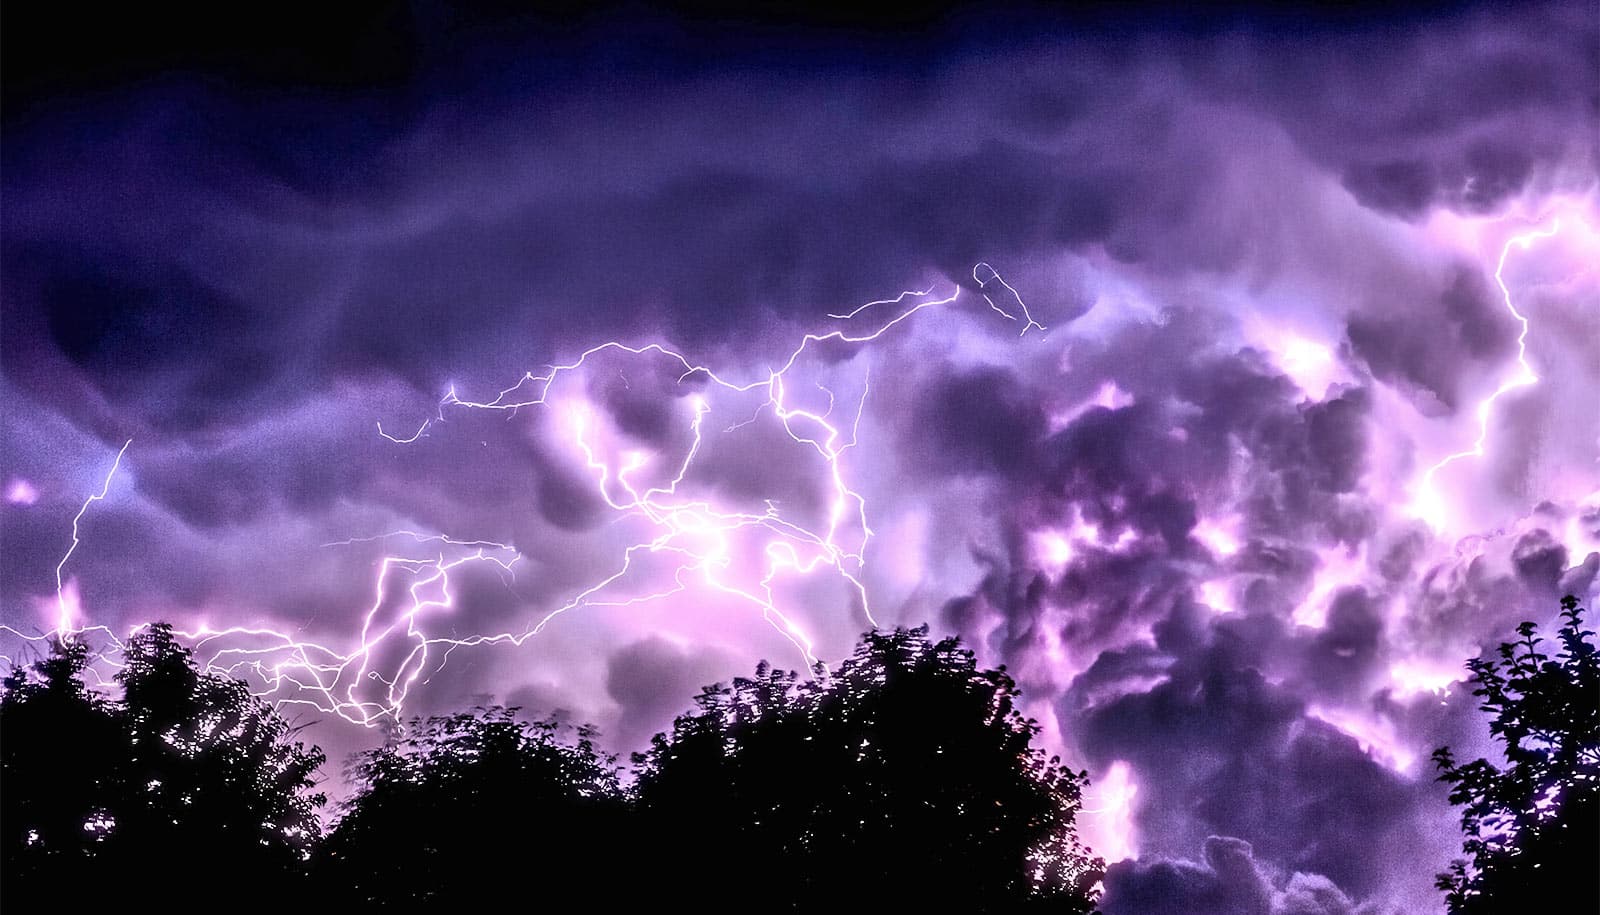 A dark and cloudy sky filled with purple lightning.